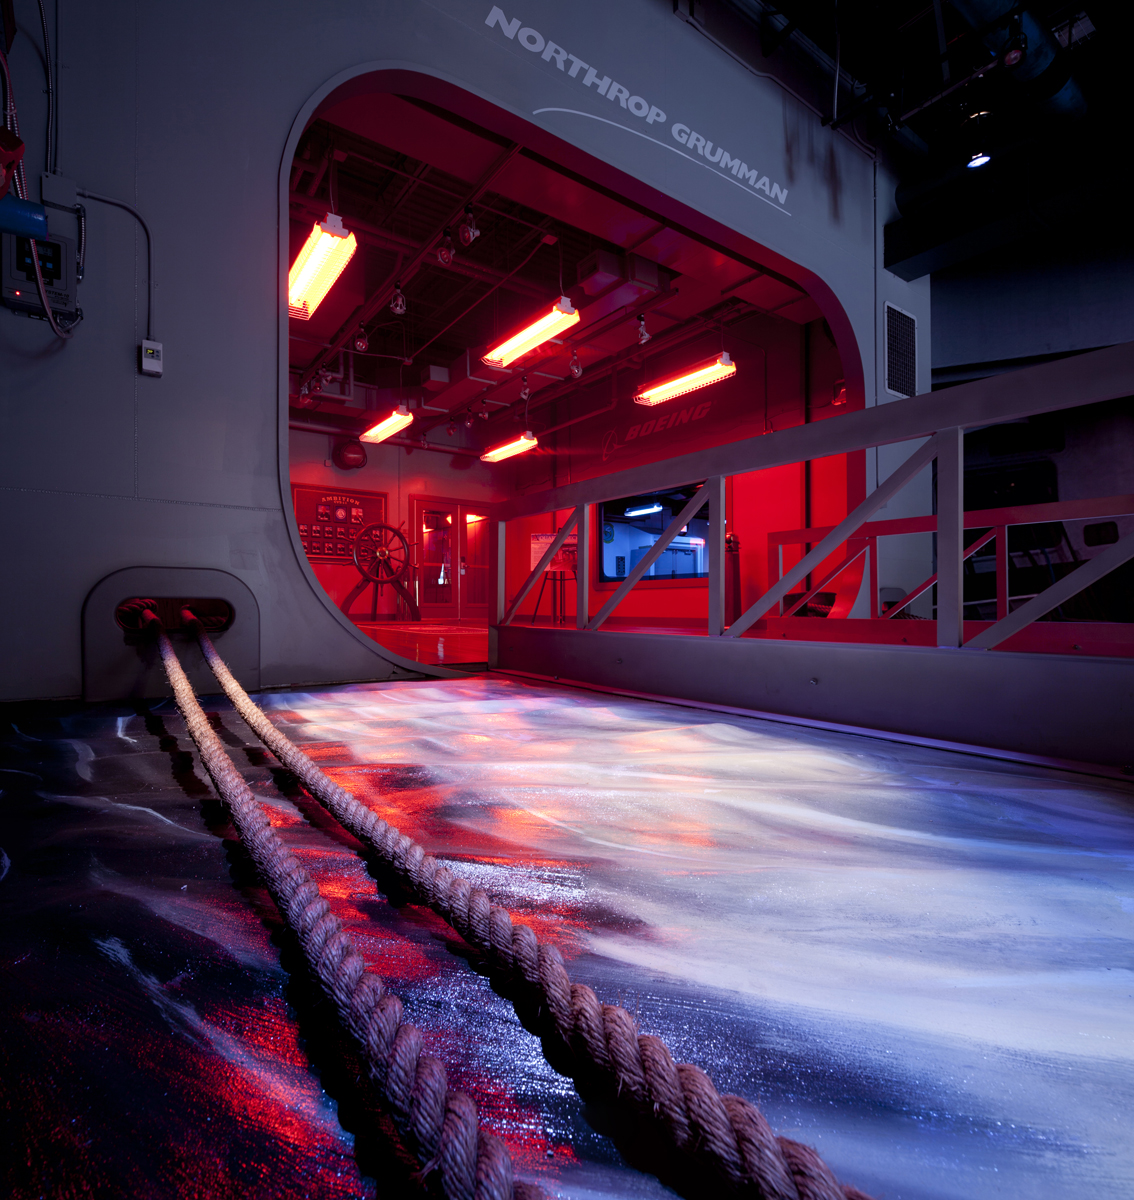 The National Flight Academy's state-of-the-art simulated aircraft carrier, Ambition.